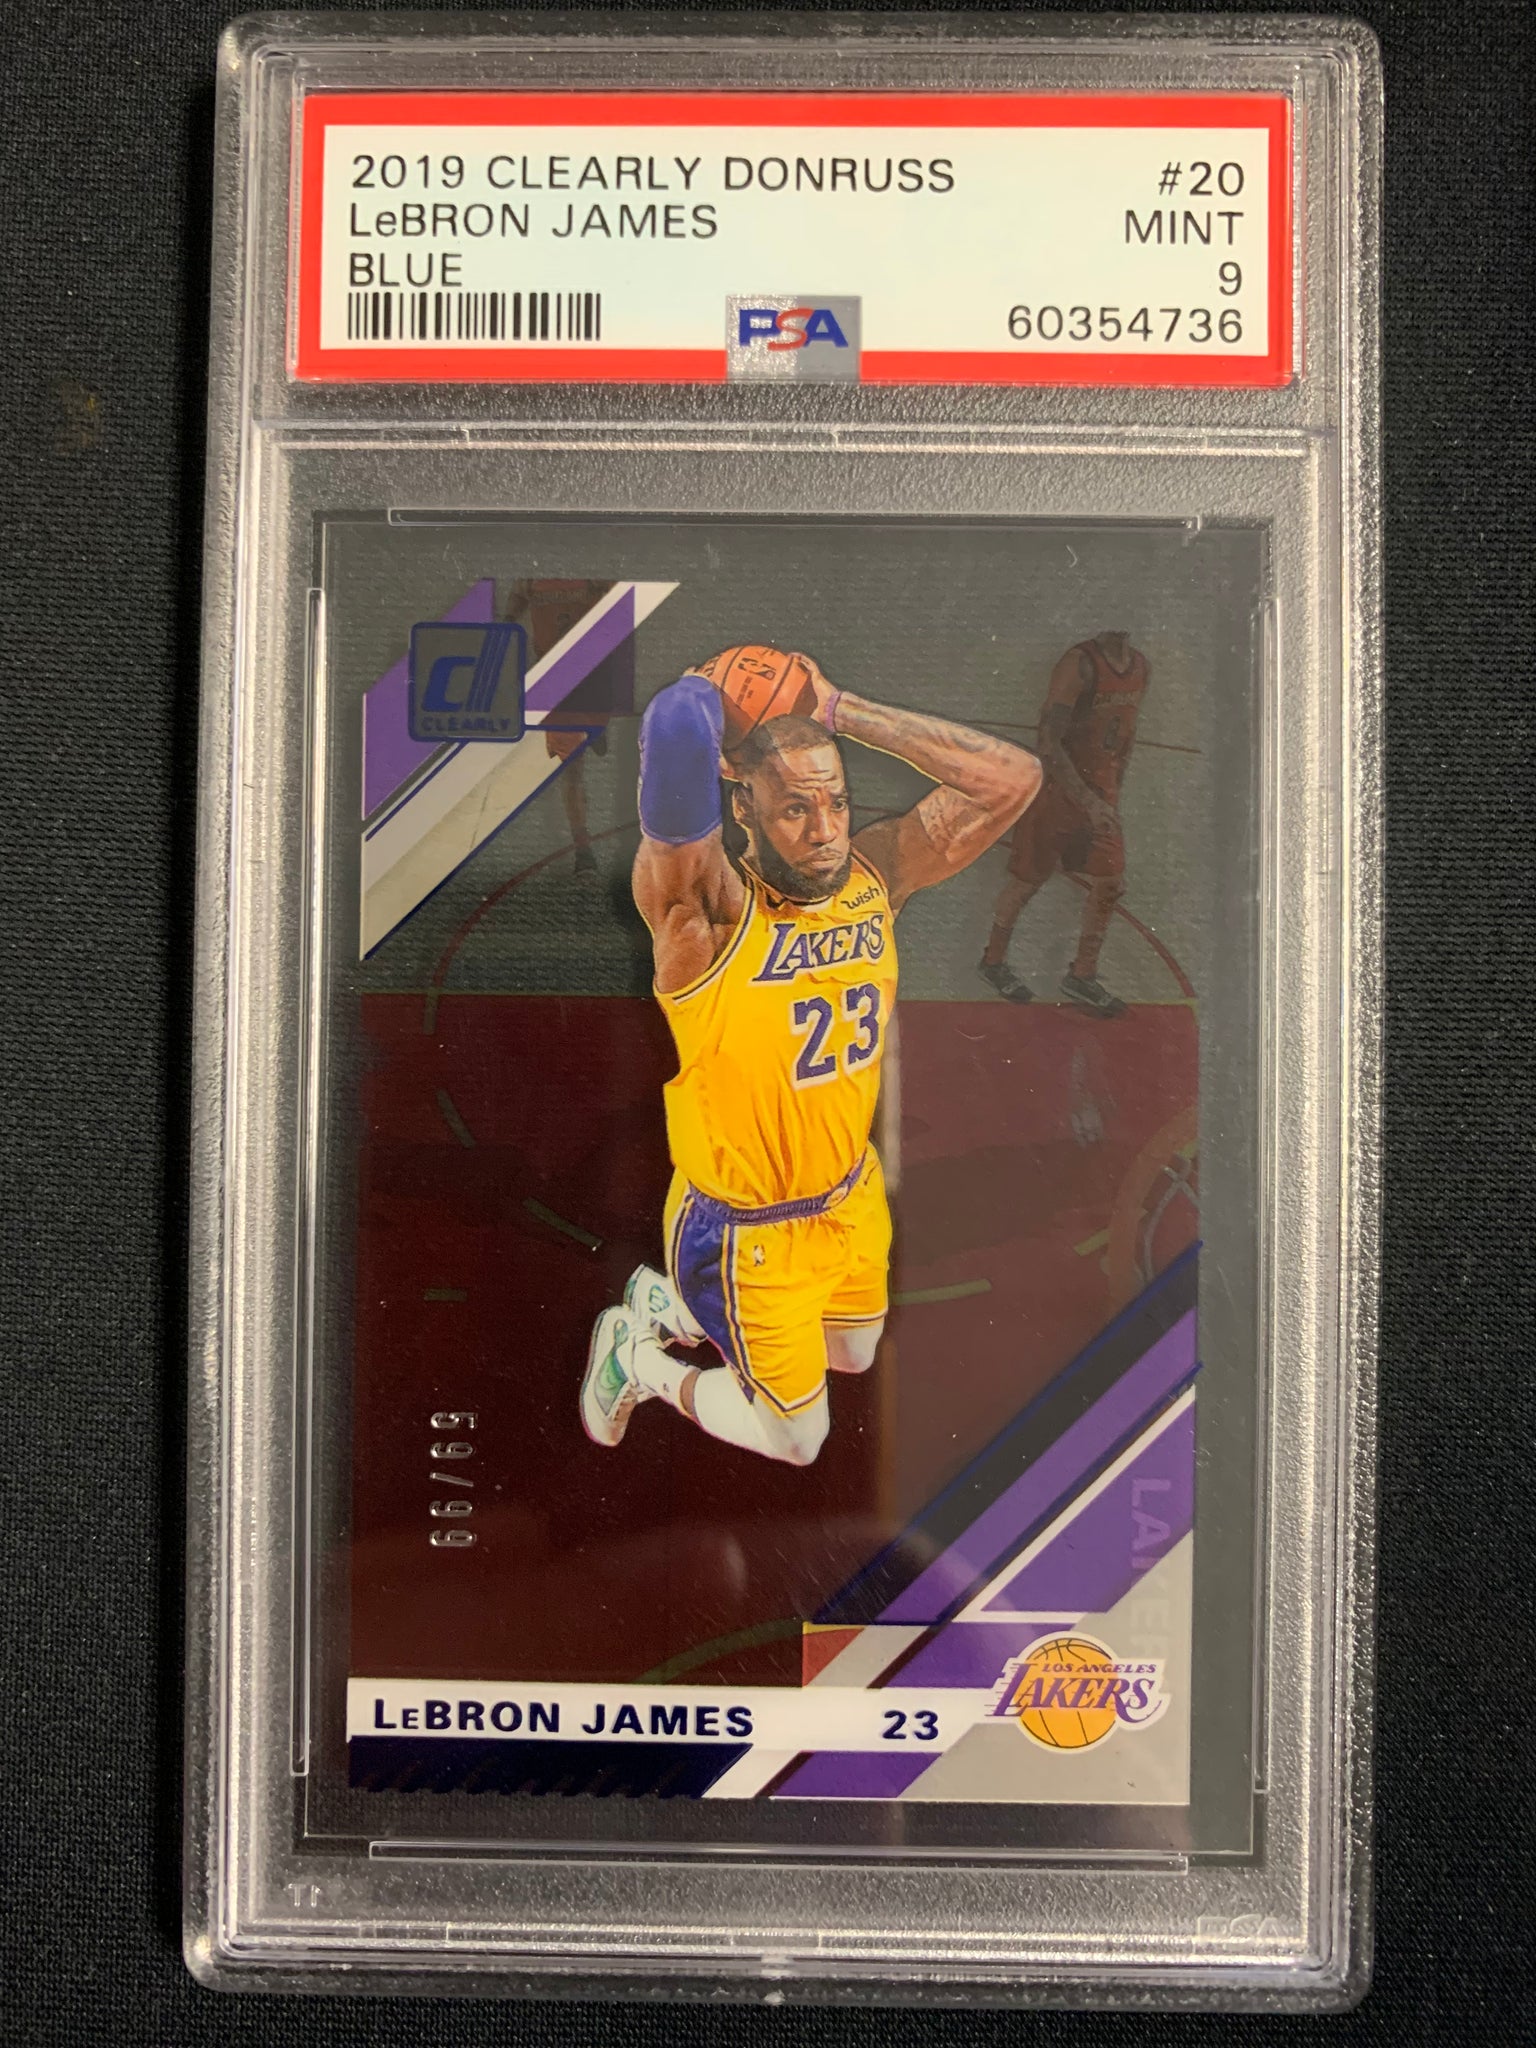 2019 PANINI CLEARLY DONRUSS NBA BASKETBALL #20 LOS ANGELES LAKERS - LEBRON JAMES CLEARLY BLUE NUMBERED 59/99 GRADED PSA 9 MINT